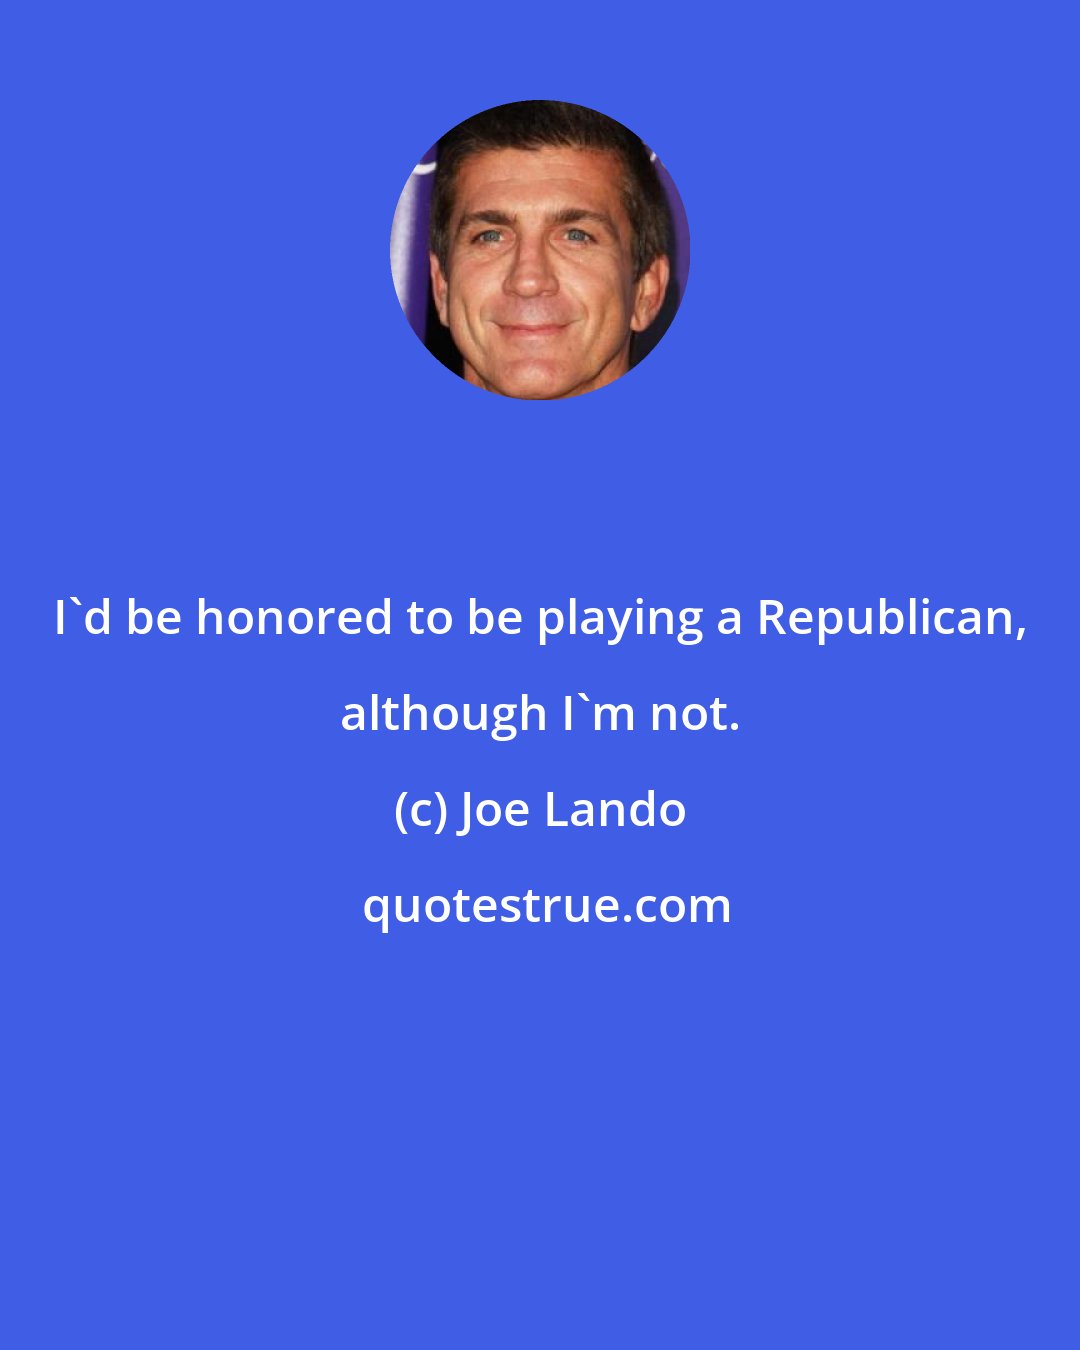 Joe Lando: I'd be honored to be playing a Republican, although I'm not.